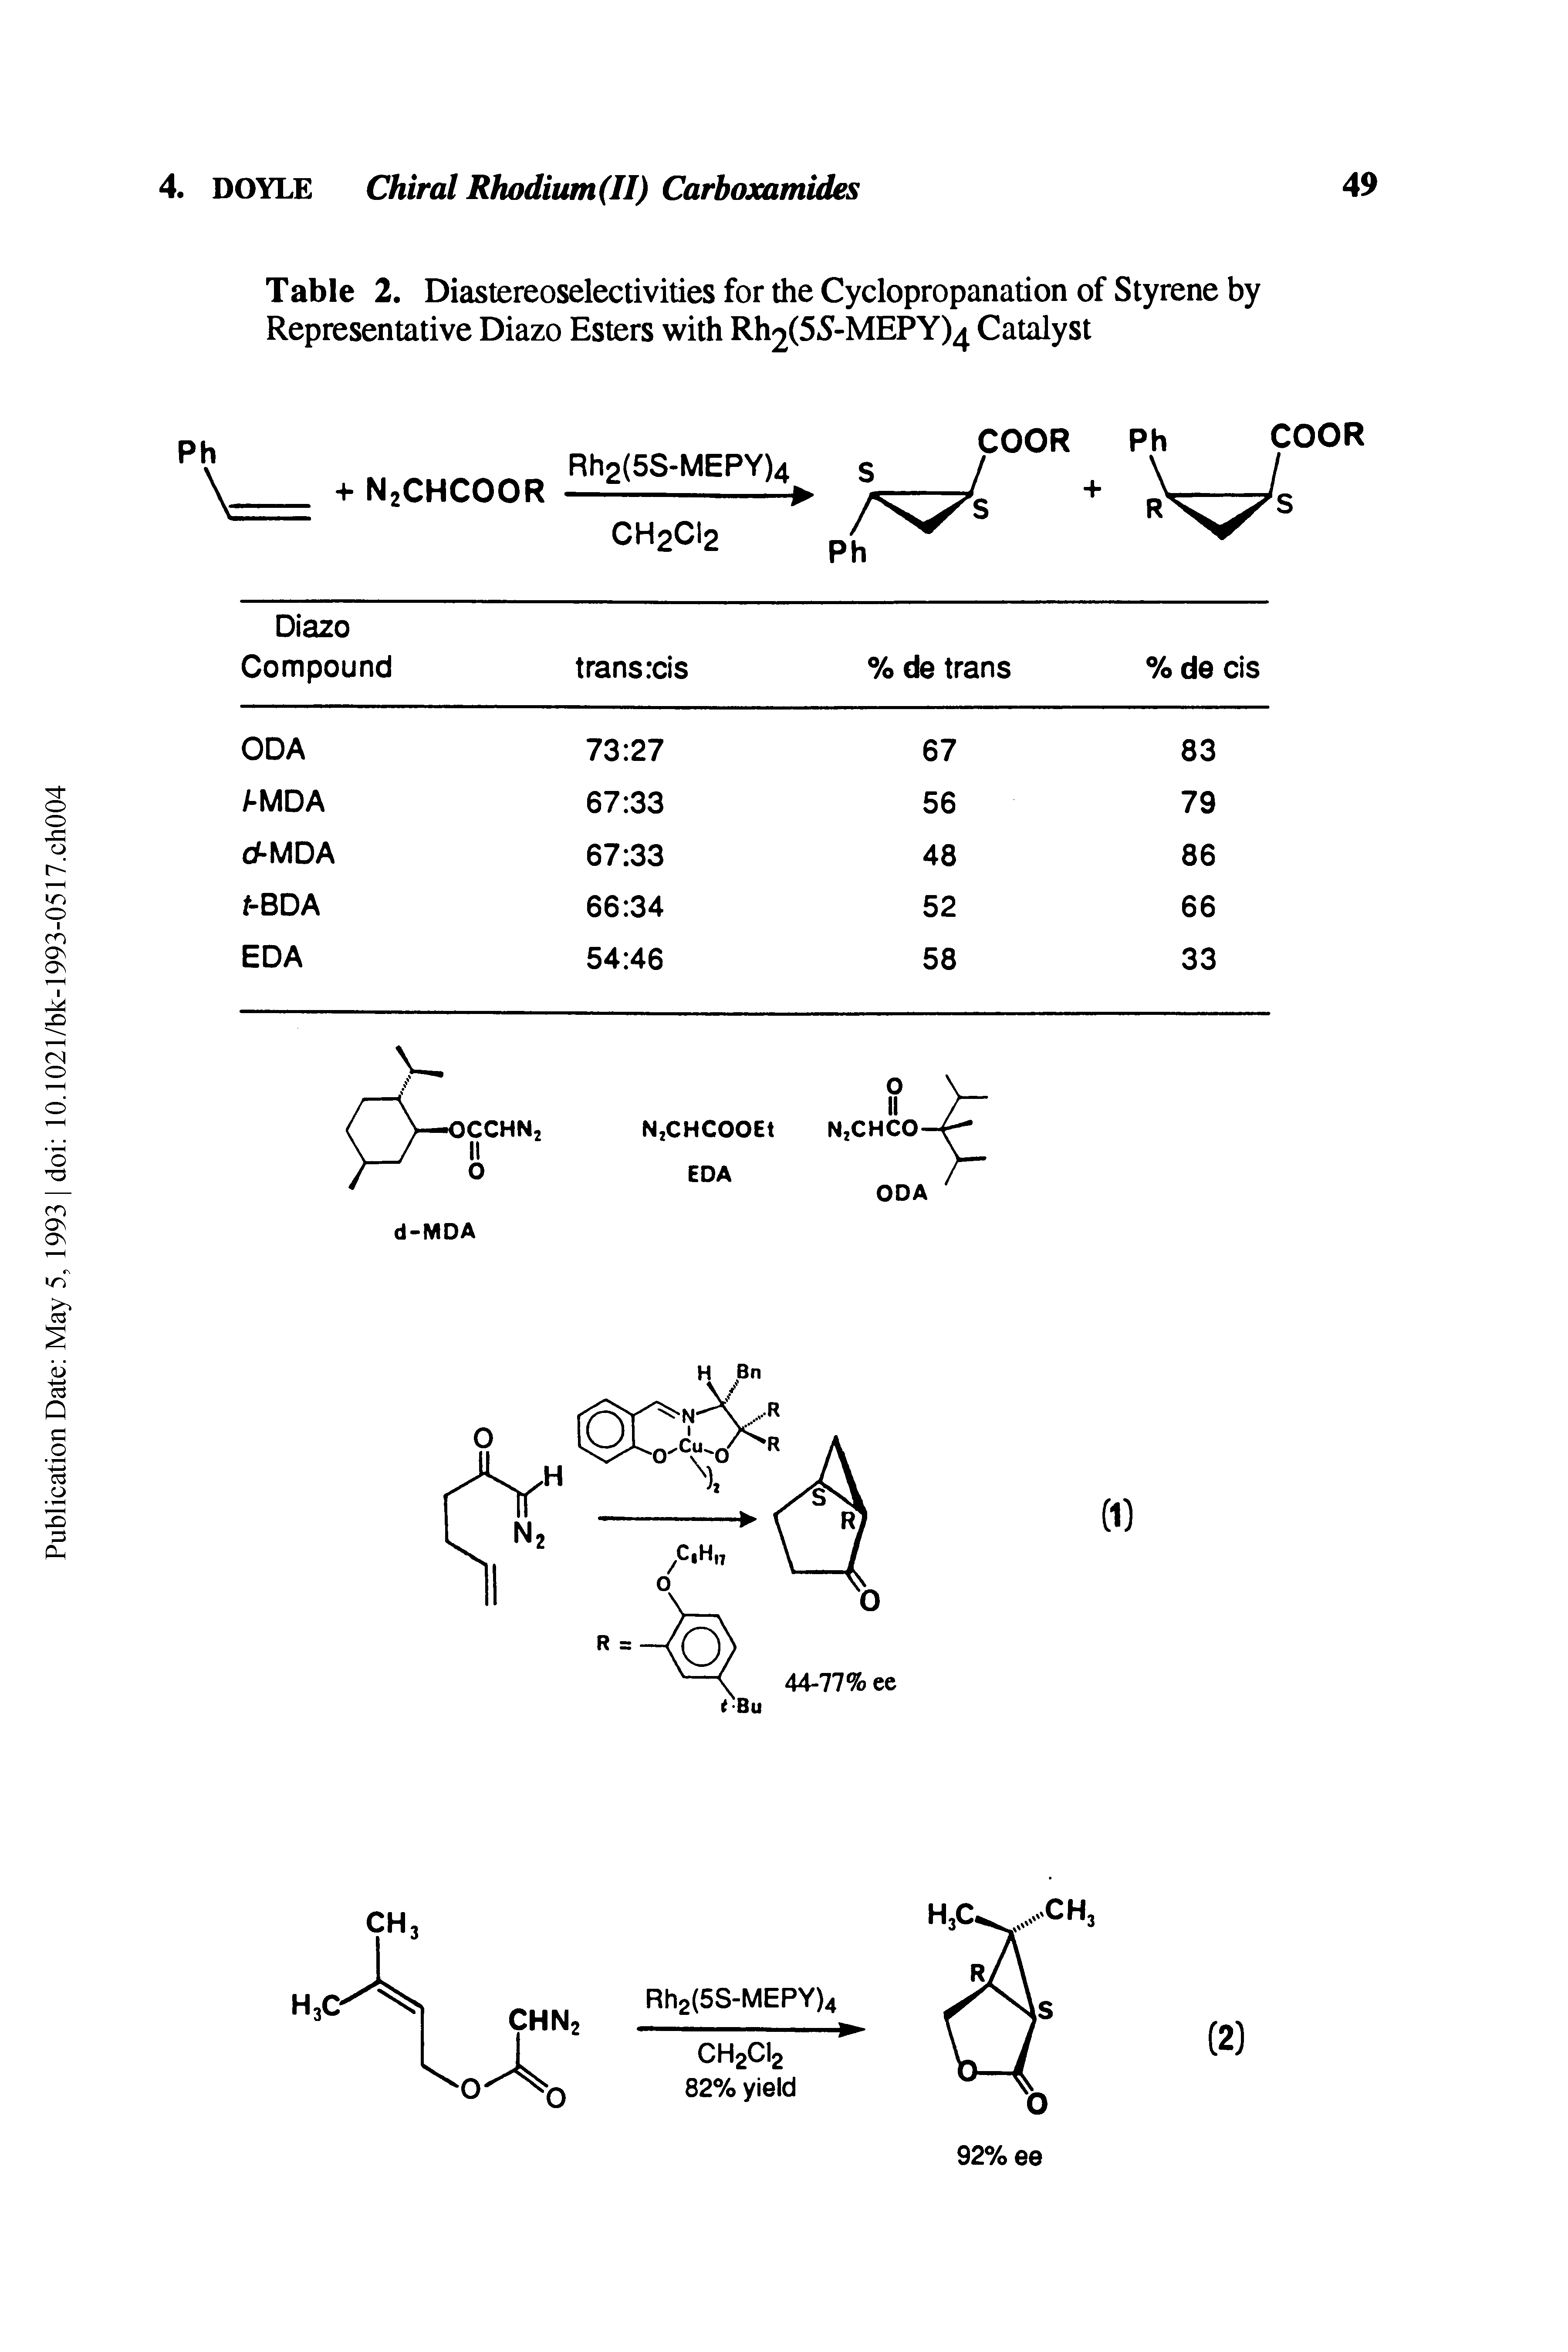 Table 2. Diastereoseleetivities for the Cyelopropanation of Styrene by Representative Diazo Esters with Rh2(5S-MEPY)4 Catalyst...